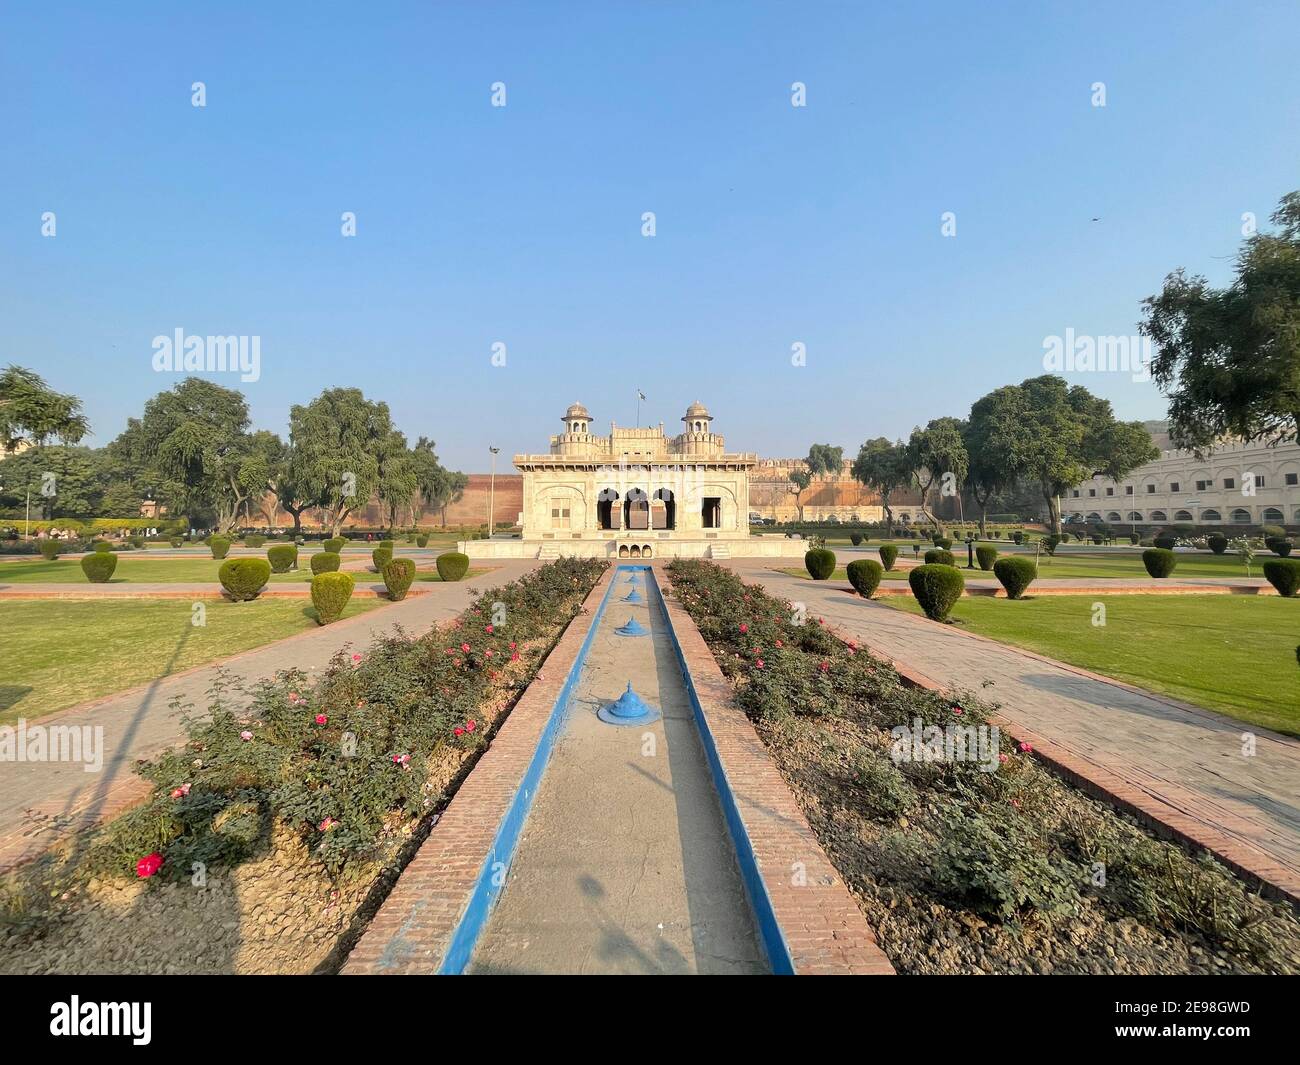 Lahore Shahi Fort and mosque Stock Photo